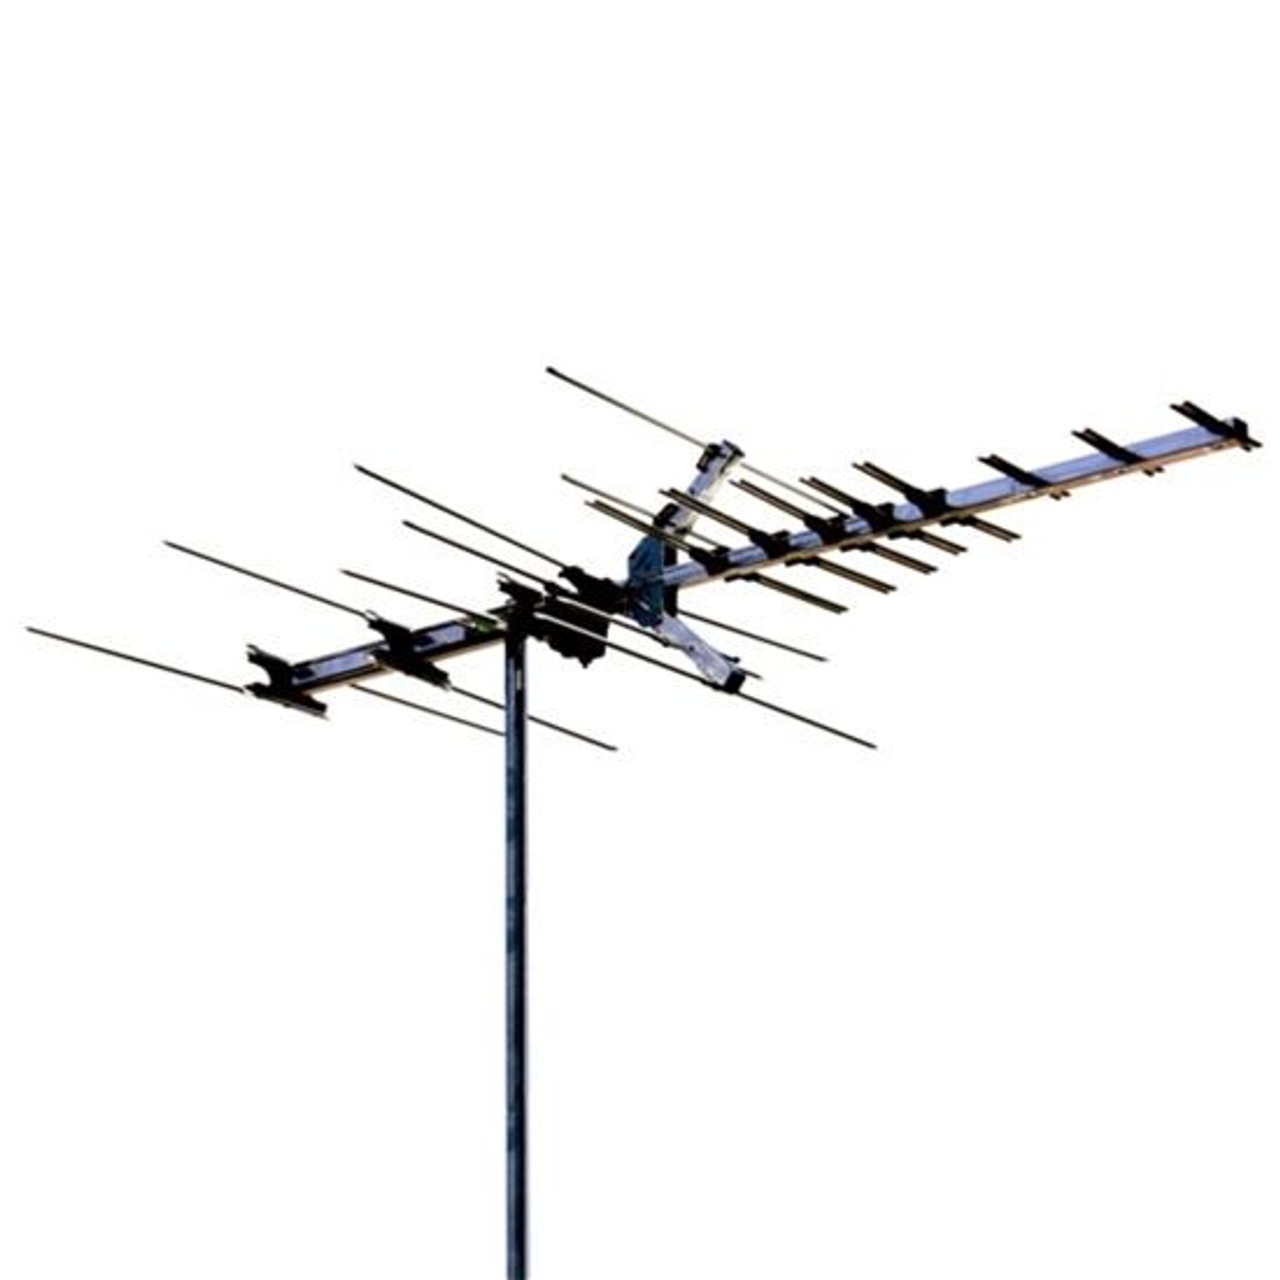 Winegard HD7694P Digital HDTV High Definition VHF/UHF HD769 Series Antenna 28 Element Off-Air Local HD Signal Channel Outdoor Television Aerial